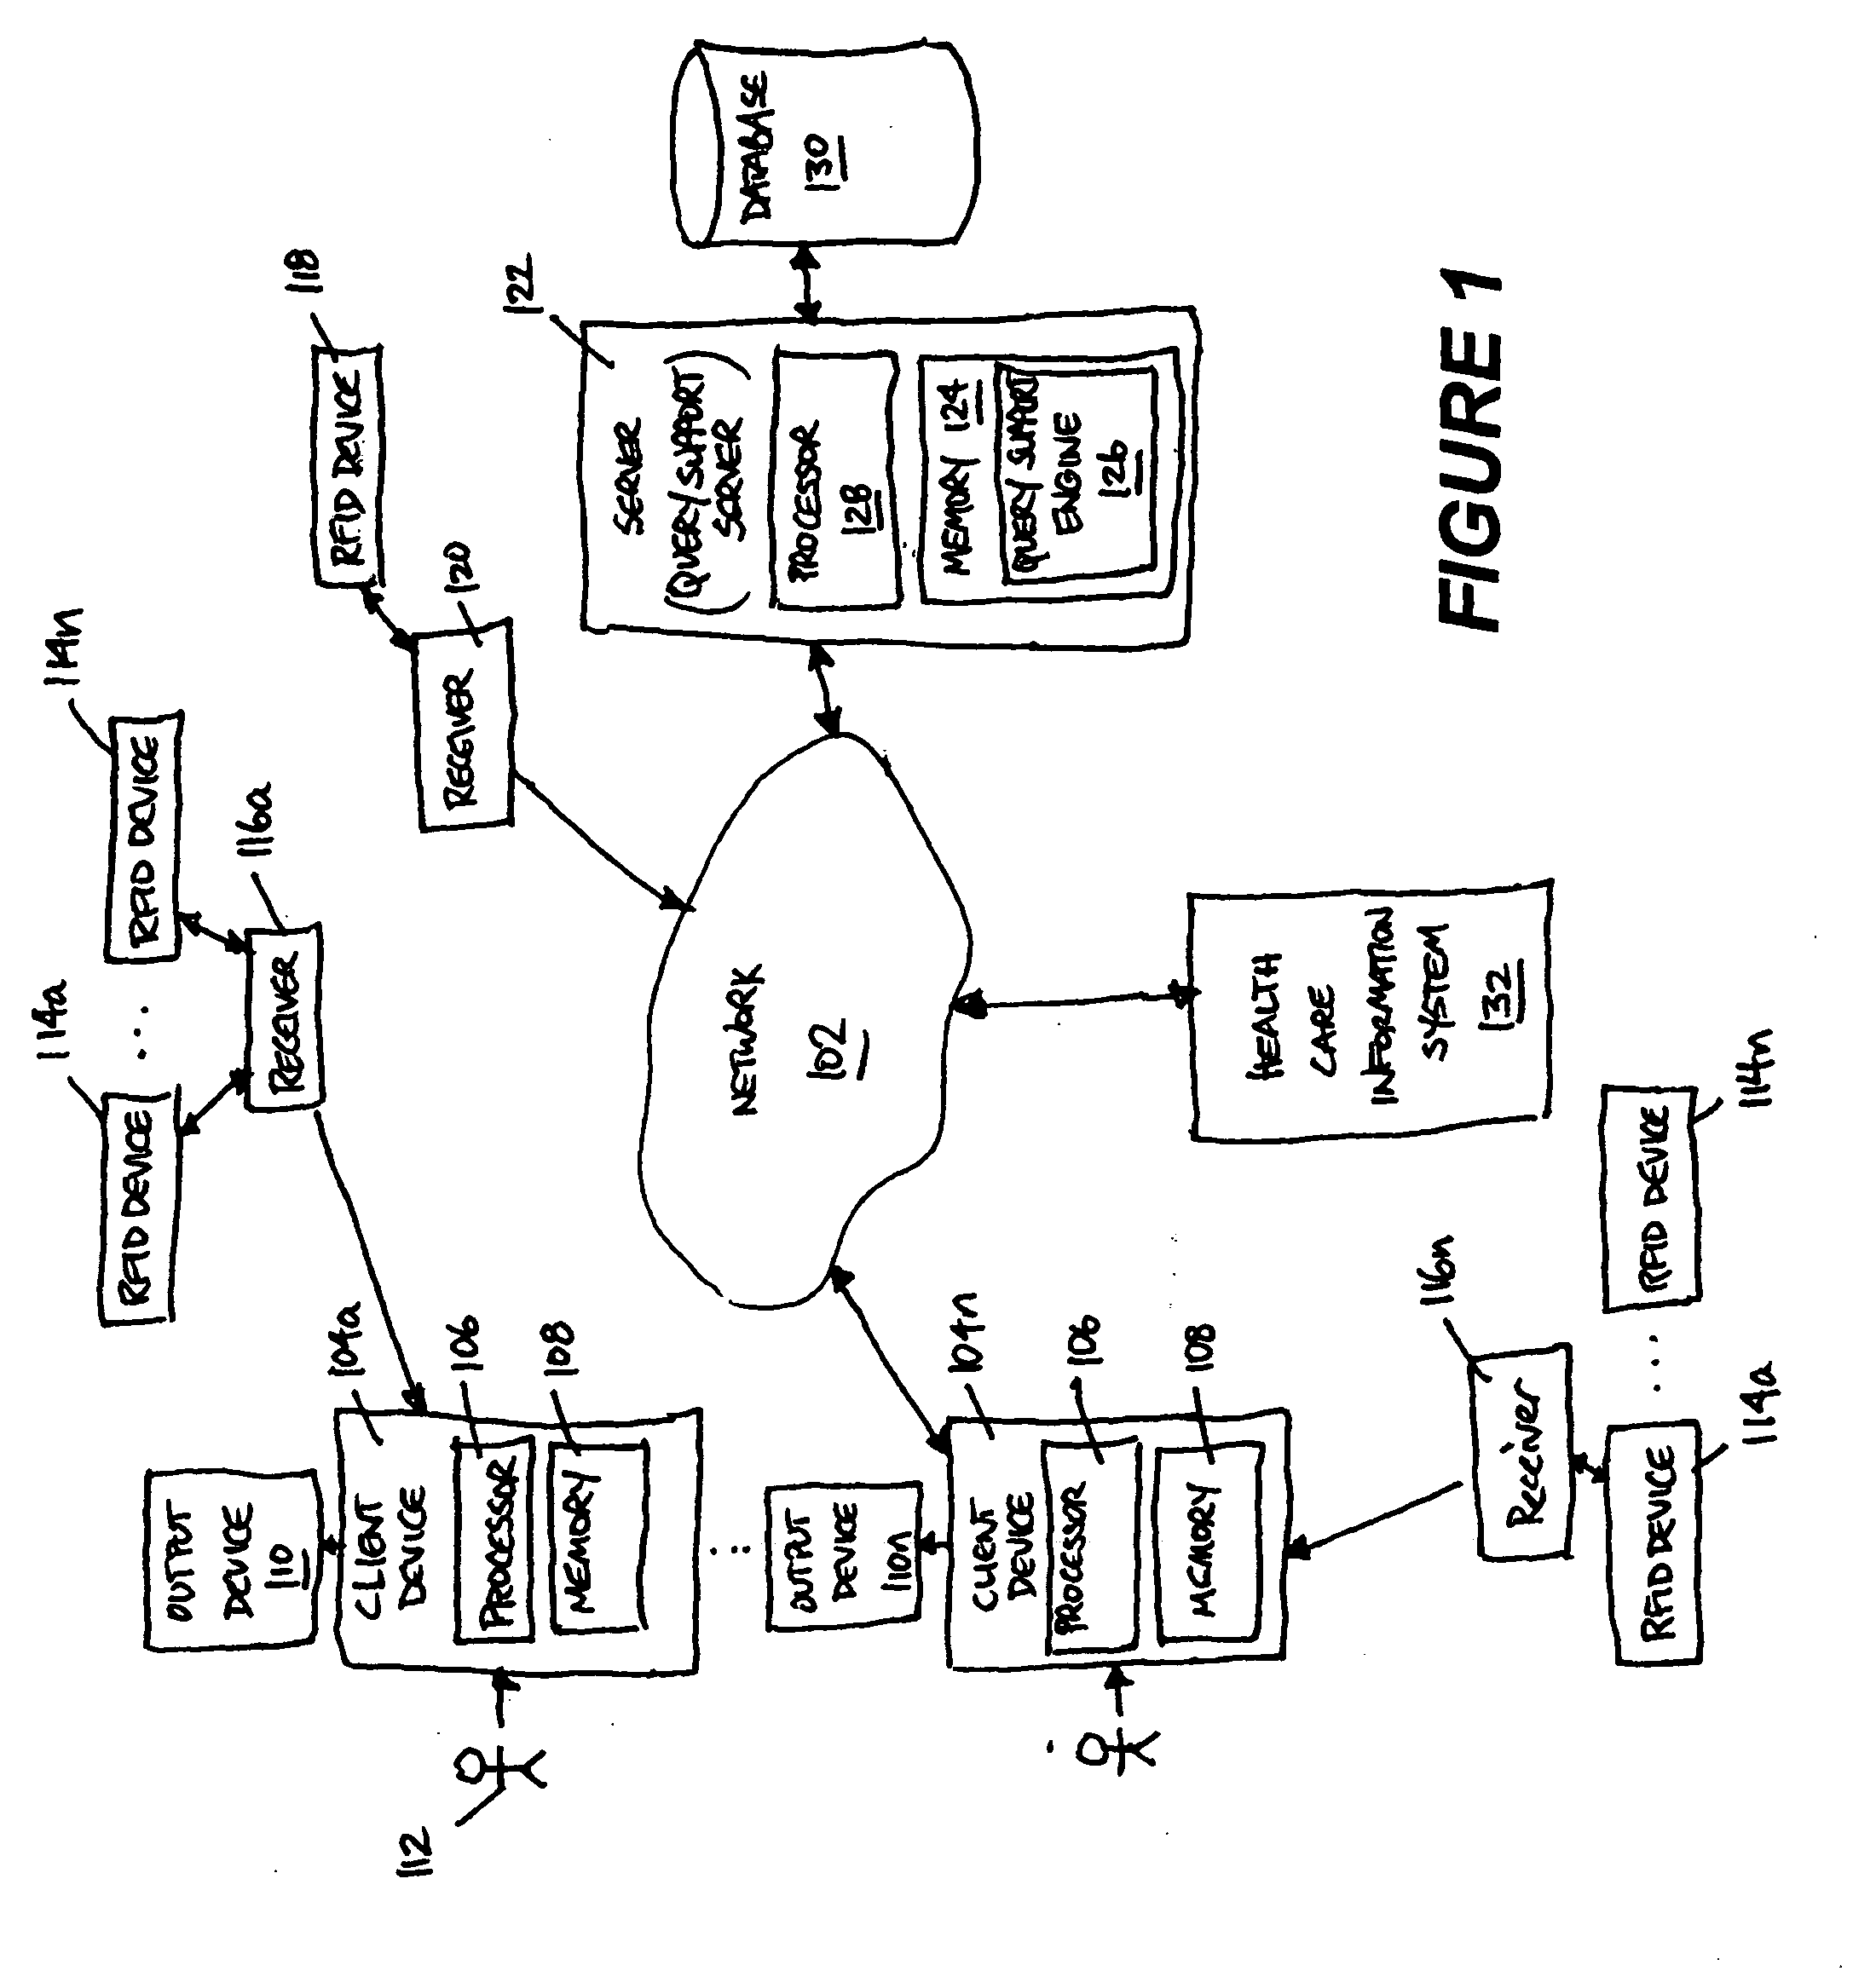 Methods, systems, and apparatus for providing real time query support and graphical views of patient care information